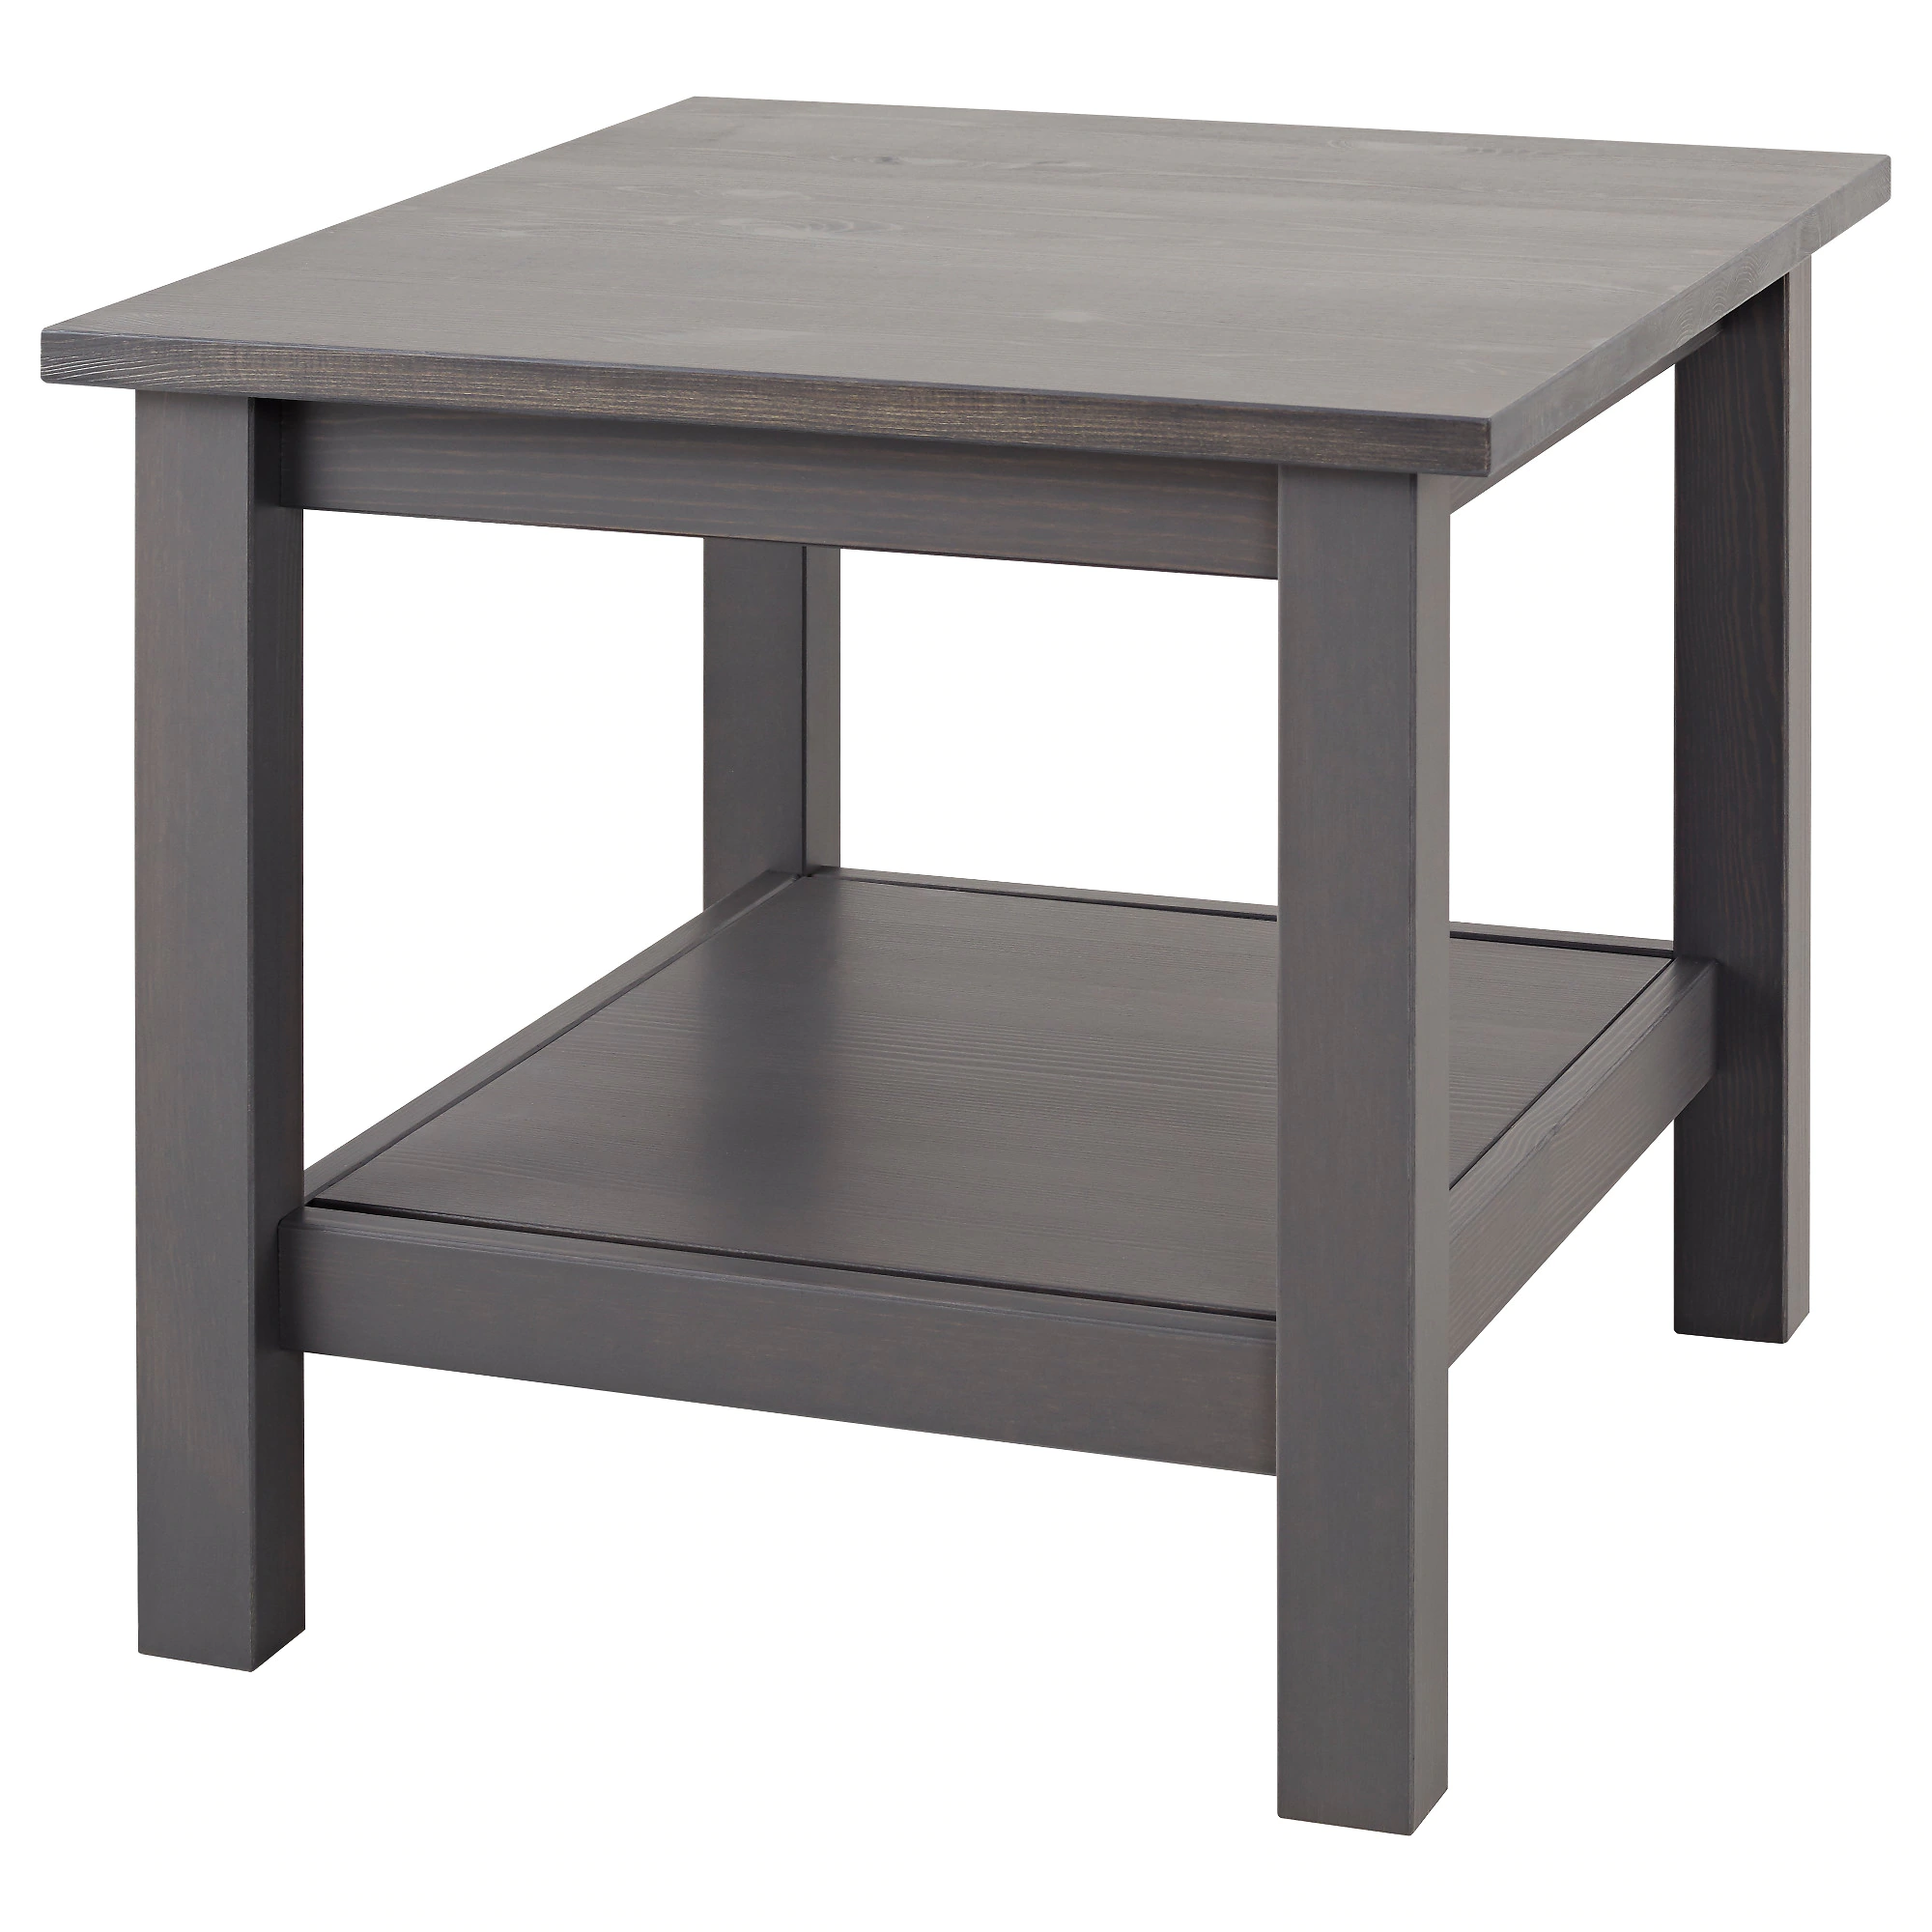 hemnes side table ikea outdoor gray feedback round silver mirror jcpenny bedding woodard furniture black and white modern coffee dorm ideas door designs for rooms dining uttermost